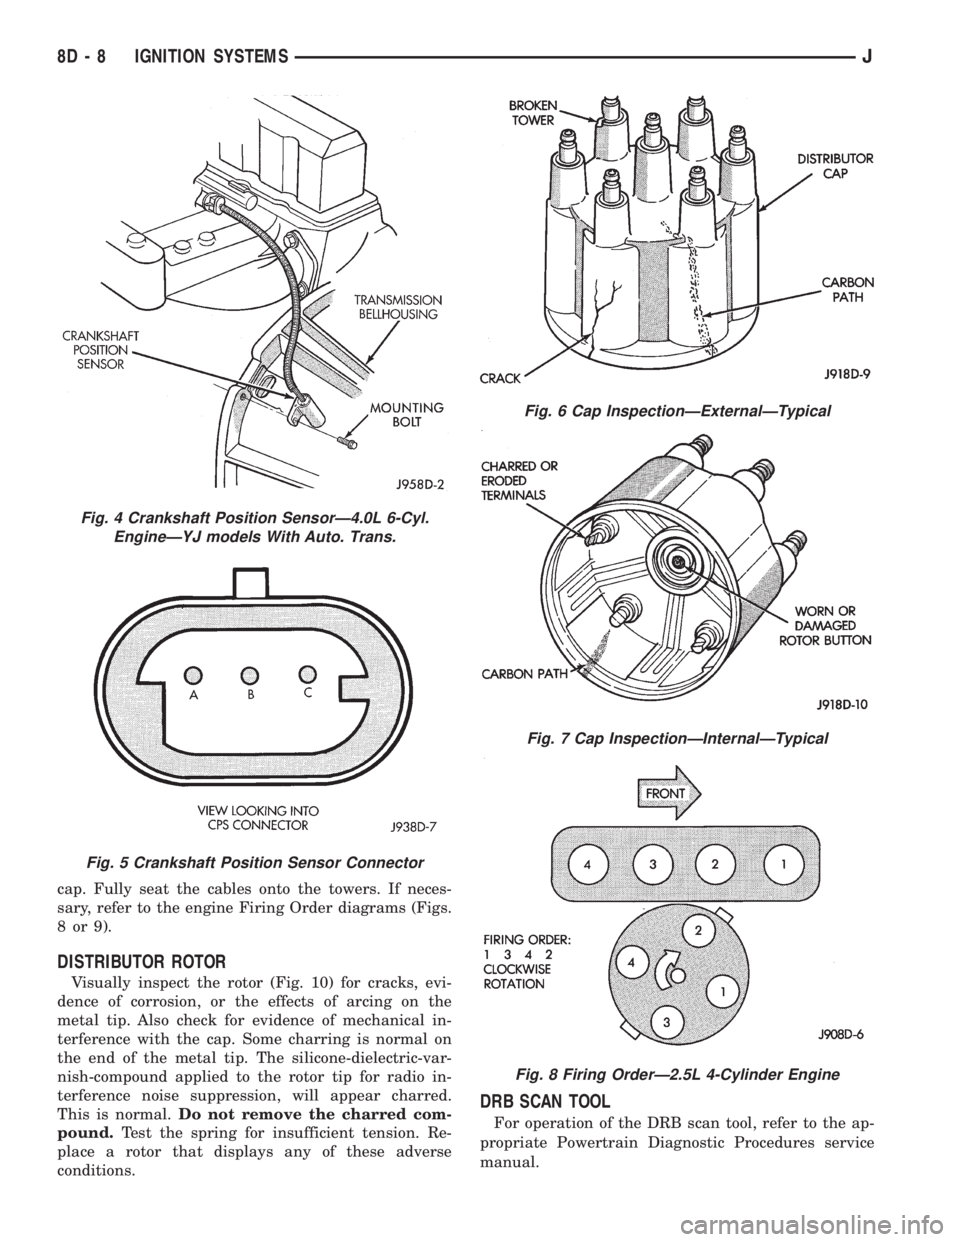 JEEP XJ 1995  Service And User Guide cap. Fully seat the cables onto the towers. If neces-
sary, refer to the engine Firing Order diagrams (Figs.
8or9).
DISTRIBUTOR ROTOR
Visually inspect the rotor (Fig. 10) for cracks, evi-
dence of cor